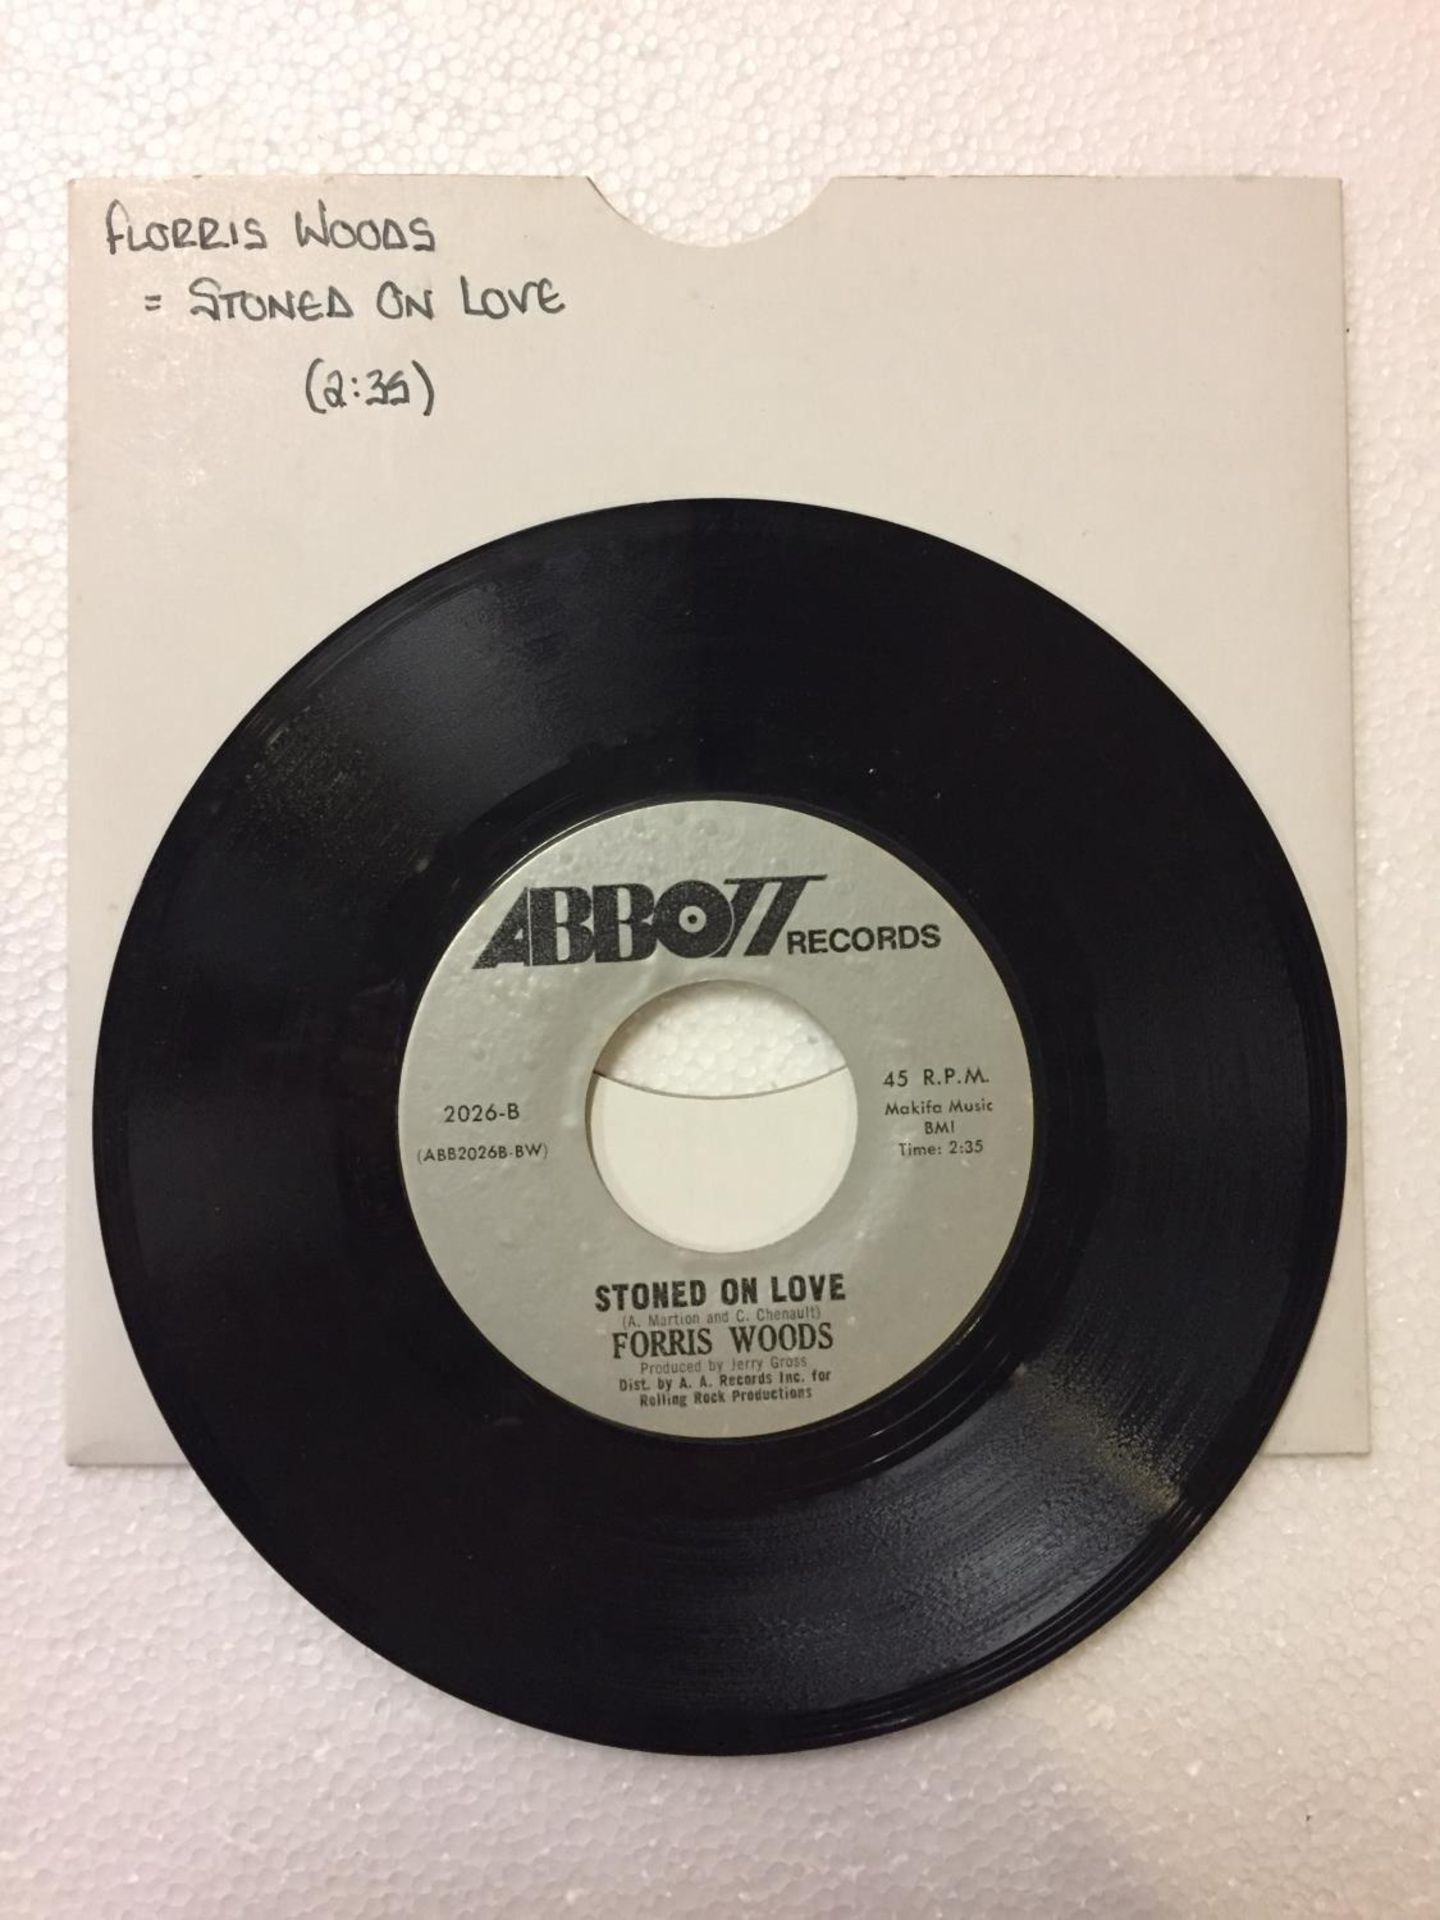 A US 1971 7 INCH VINYL FUNK / SOUL RECORD 'FIRE AND RAIN' AND B-SIDE 'STONED ON LOVE' BY FORRIS